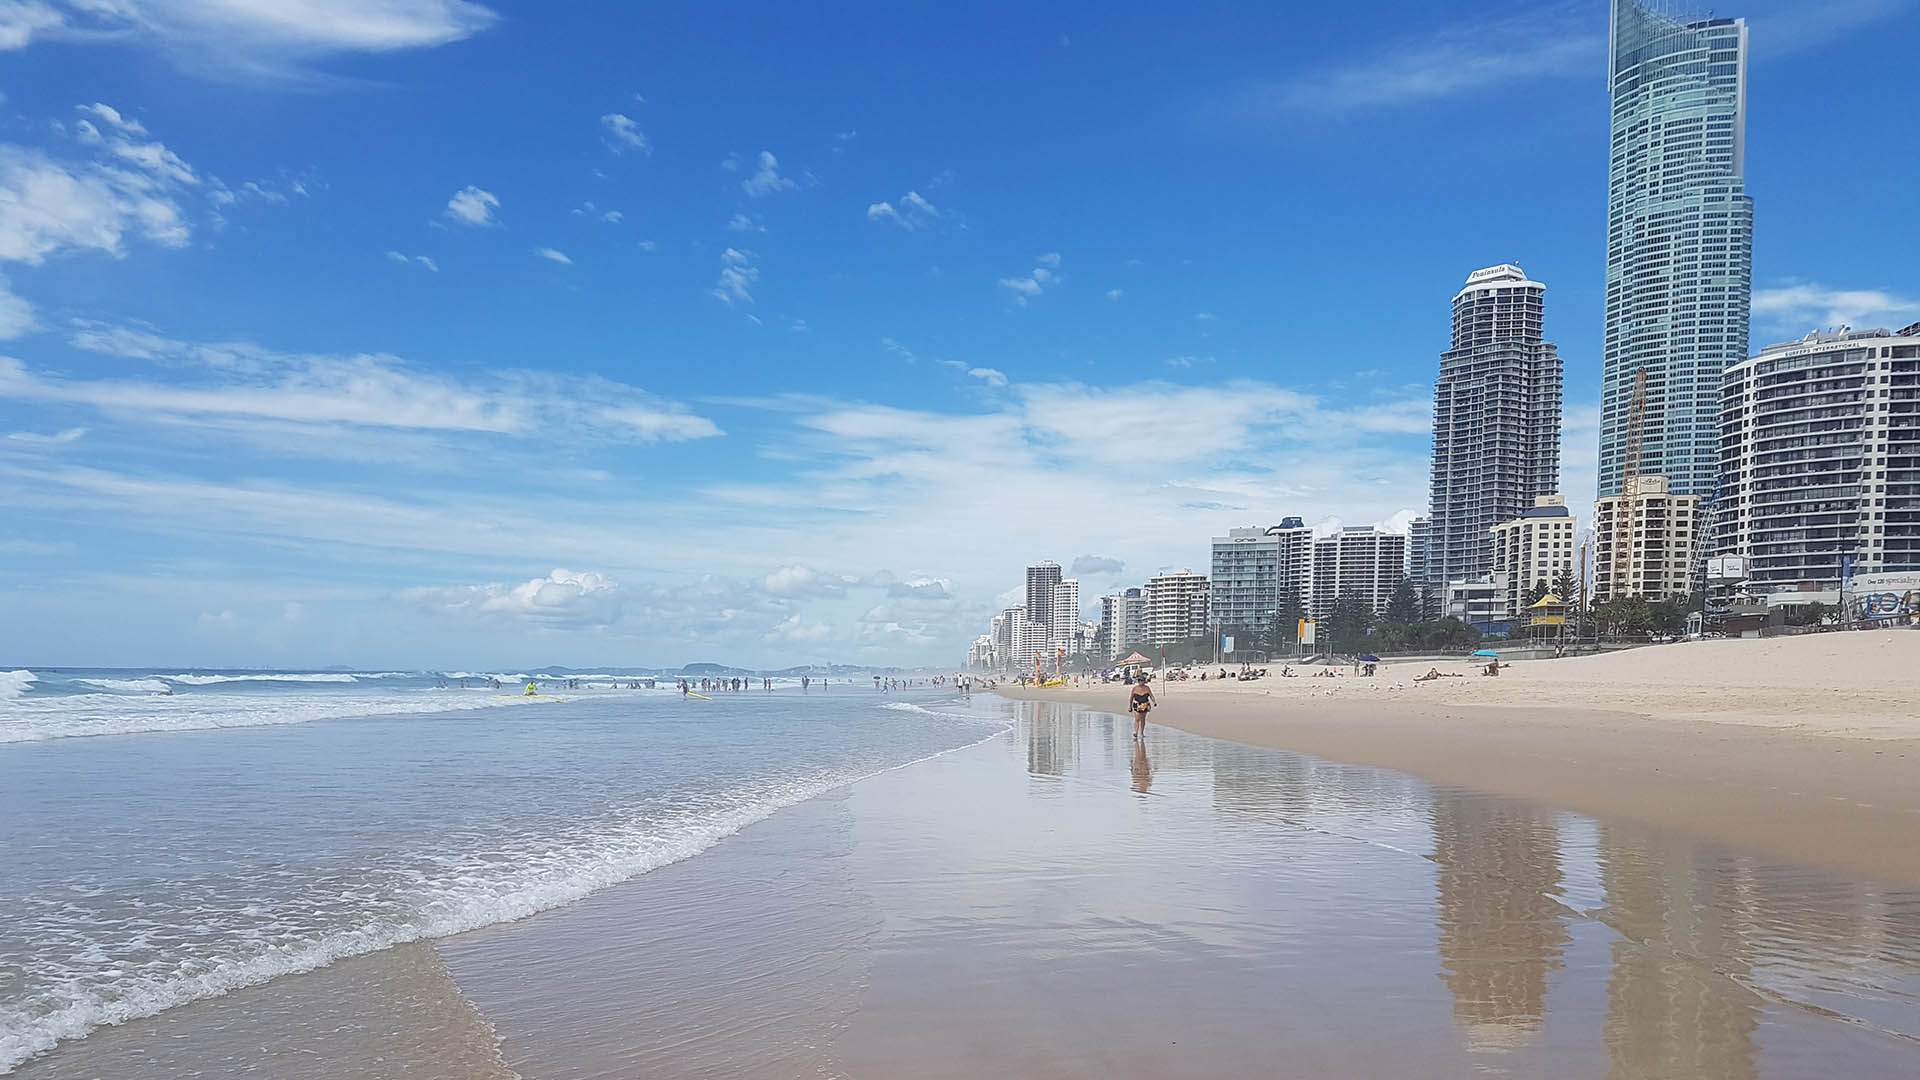 The Qld Government Is Handing Out 38,000 More Vouchers to Use on Holidays Throughout the State